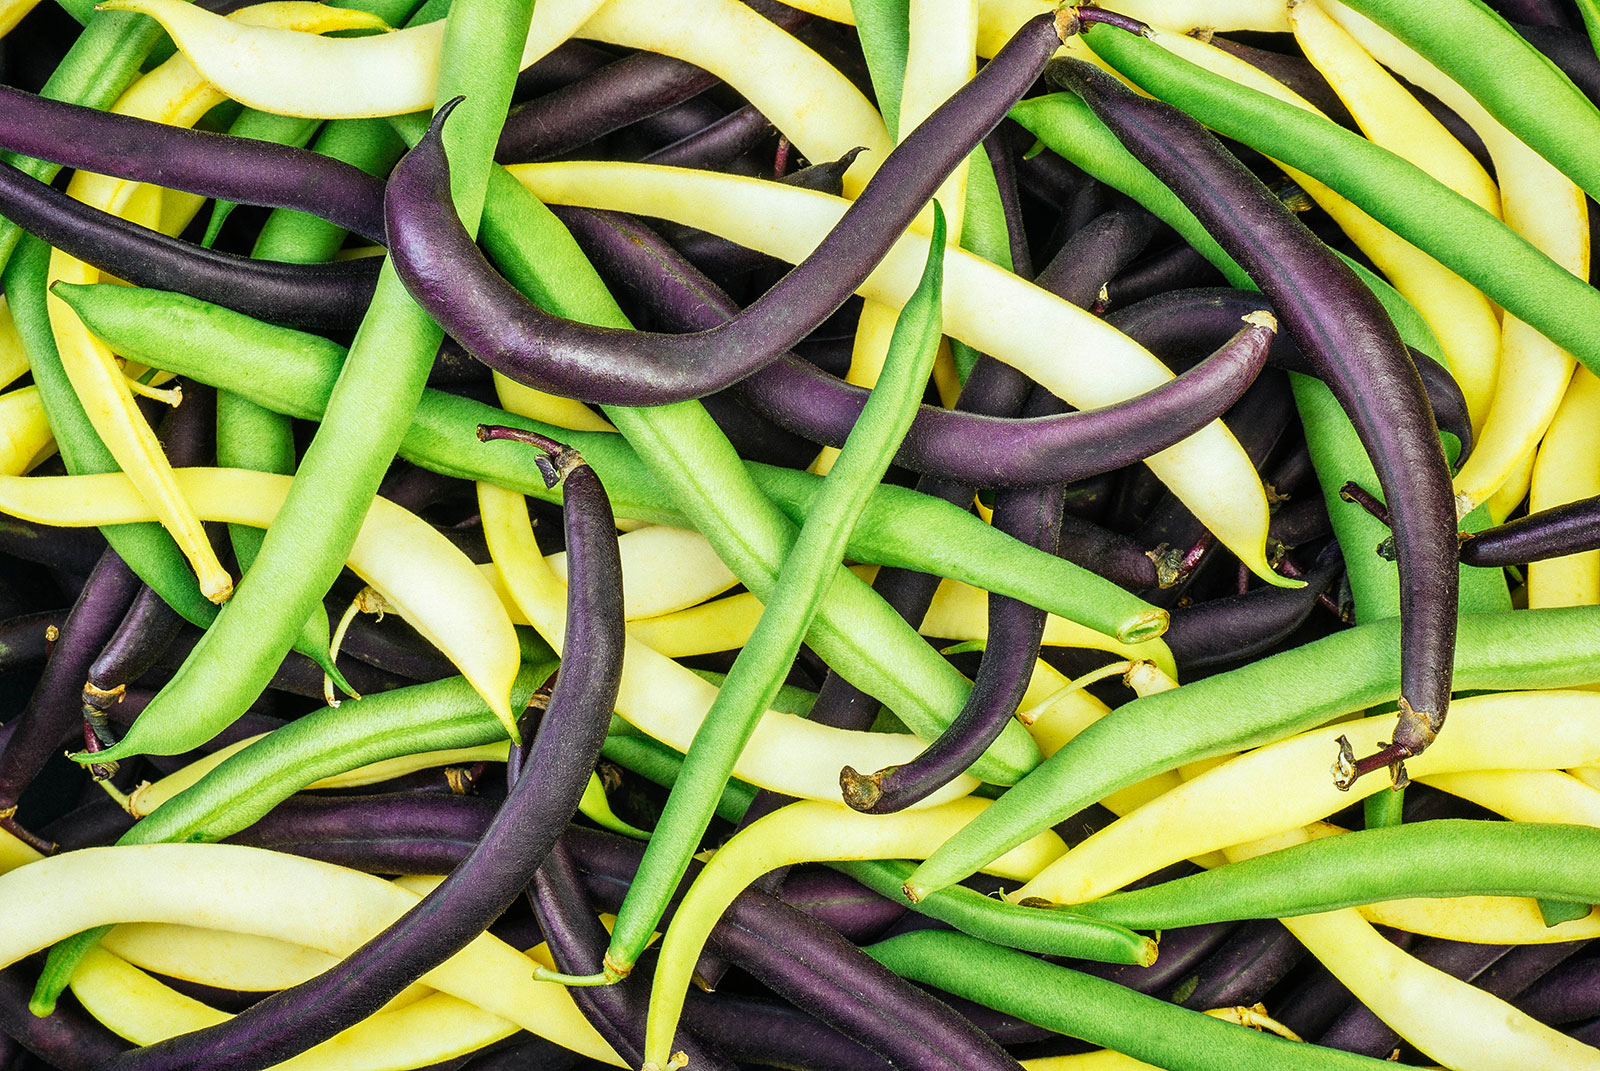 Messy pile of green, purple, and yellow bush beans